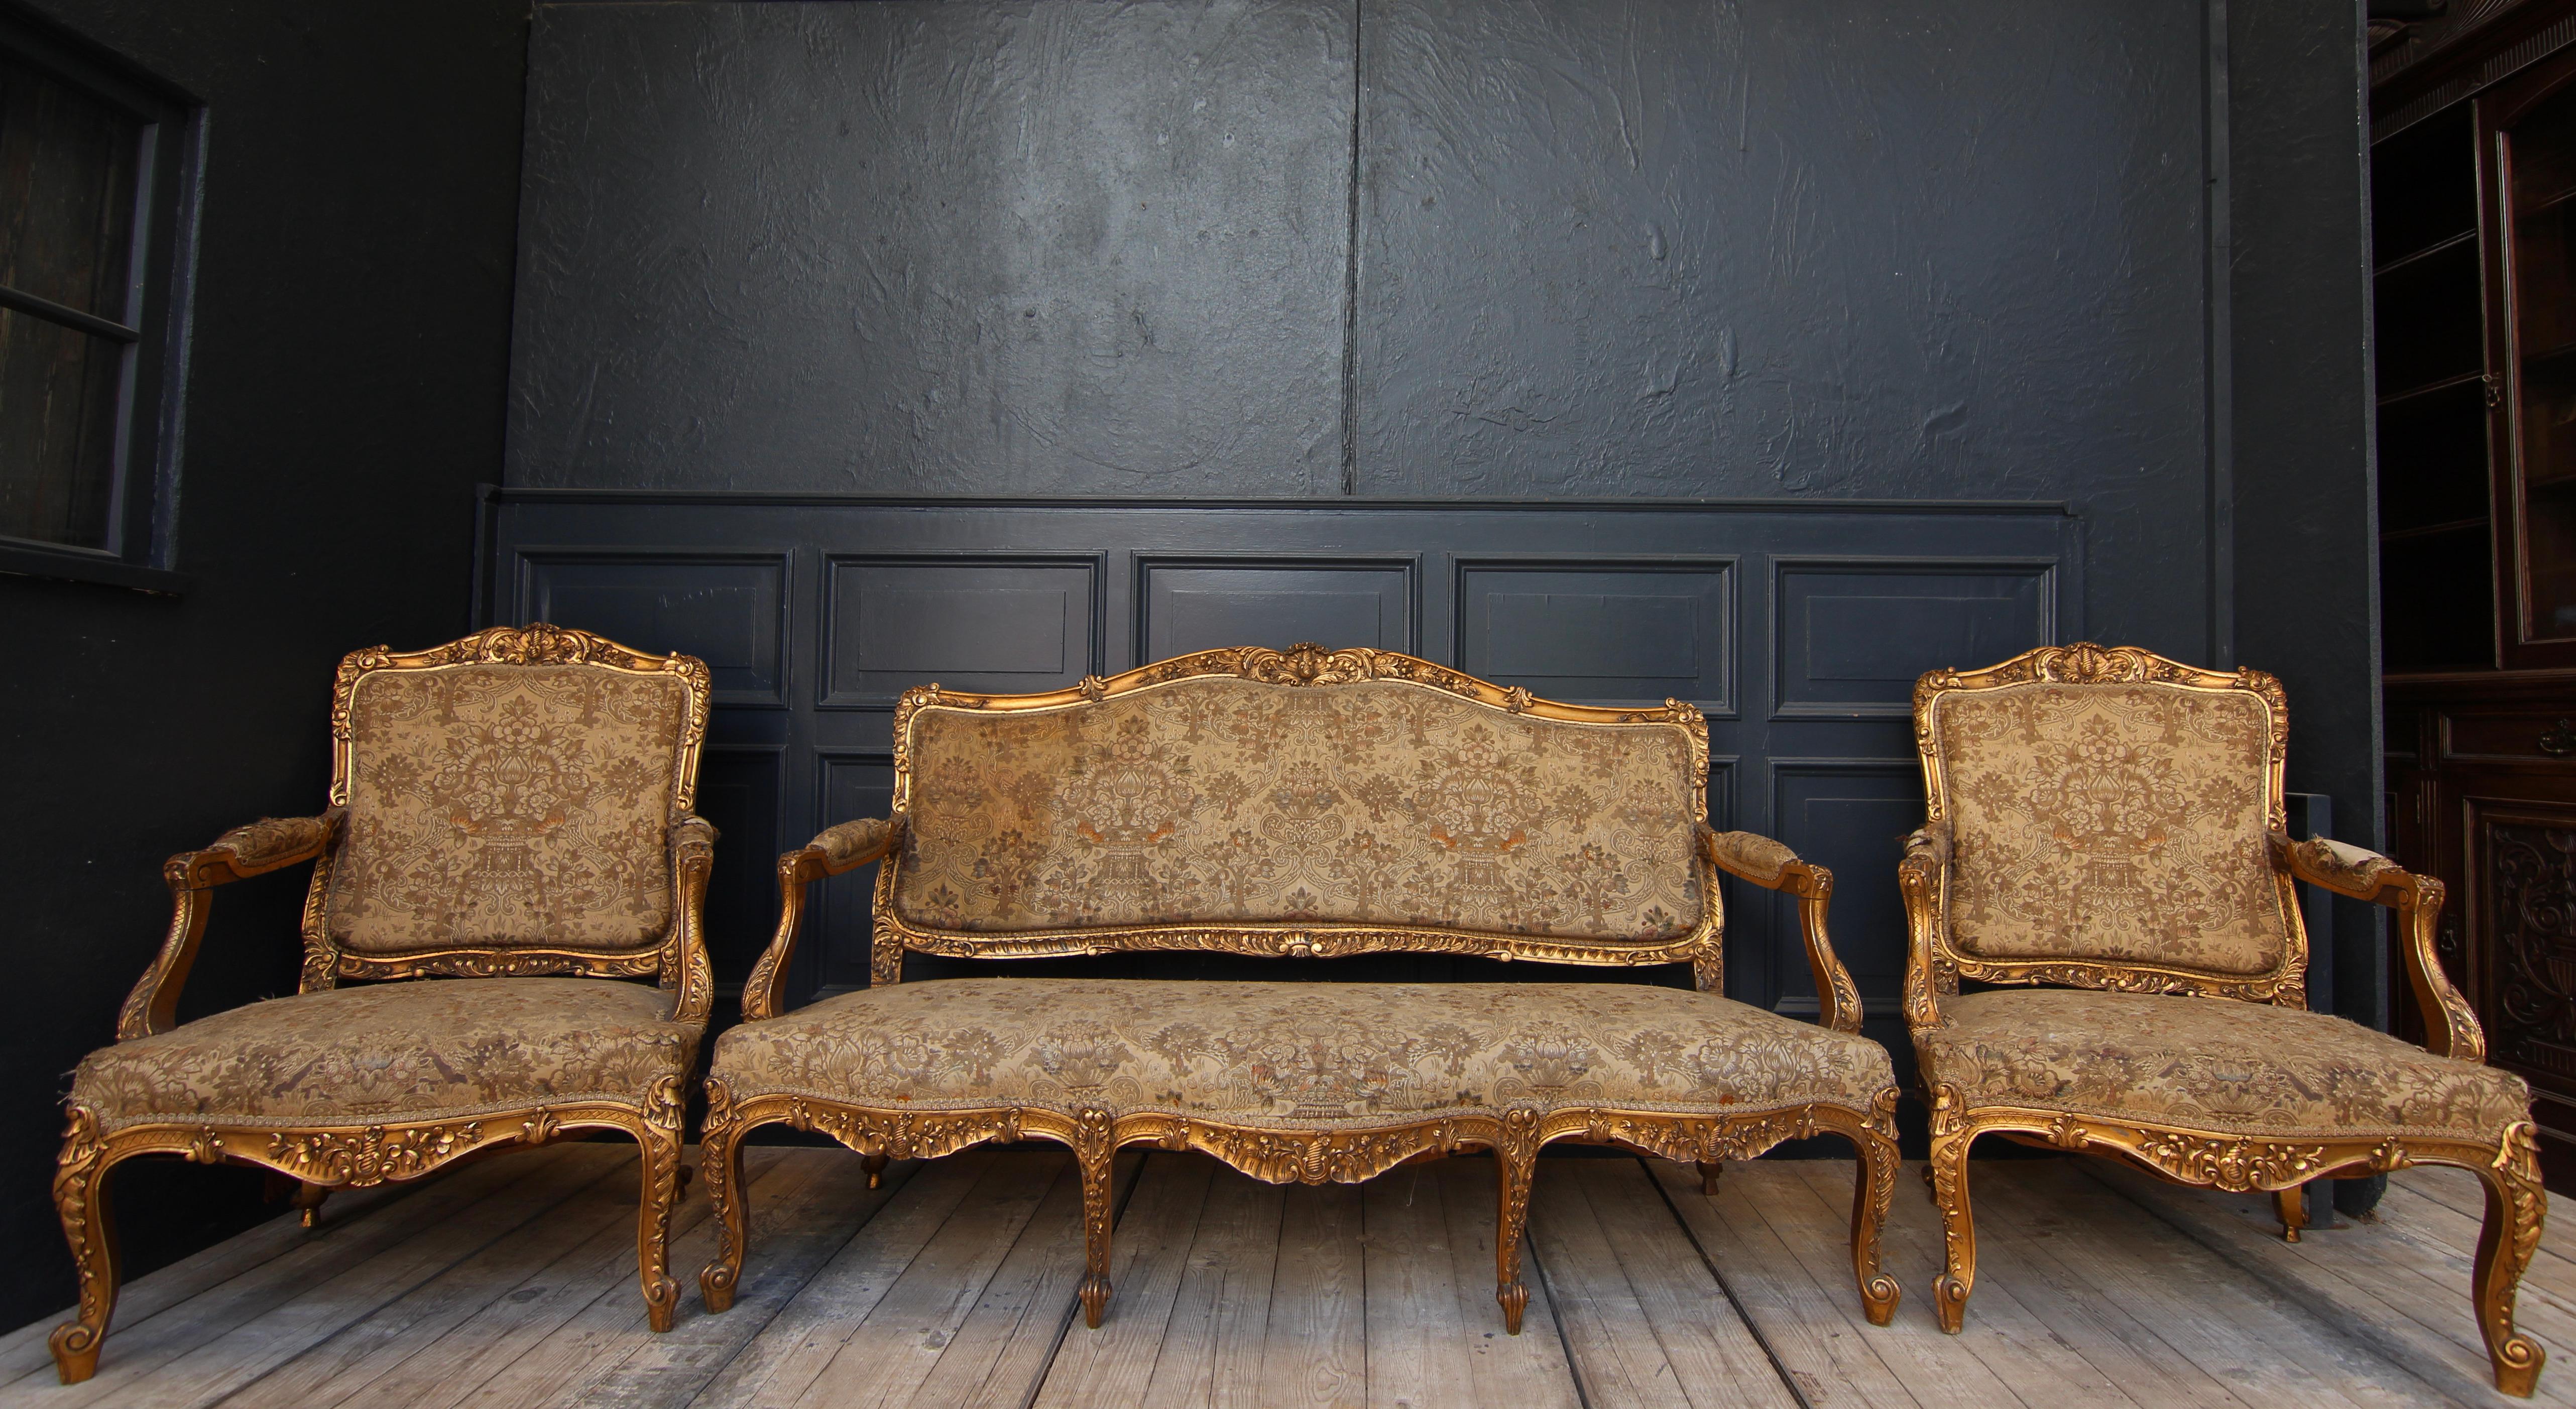 French salon group in Louis XV style. Around 1920. Unrestored original condition.

Three-piece set consisting of a sofa and 2 armchairs.

Original tapestry cover.

Dimensions:

Sofa: 
99 cm high / 39.1 inch high,
170 cm wide / 66.9 inch